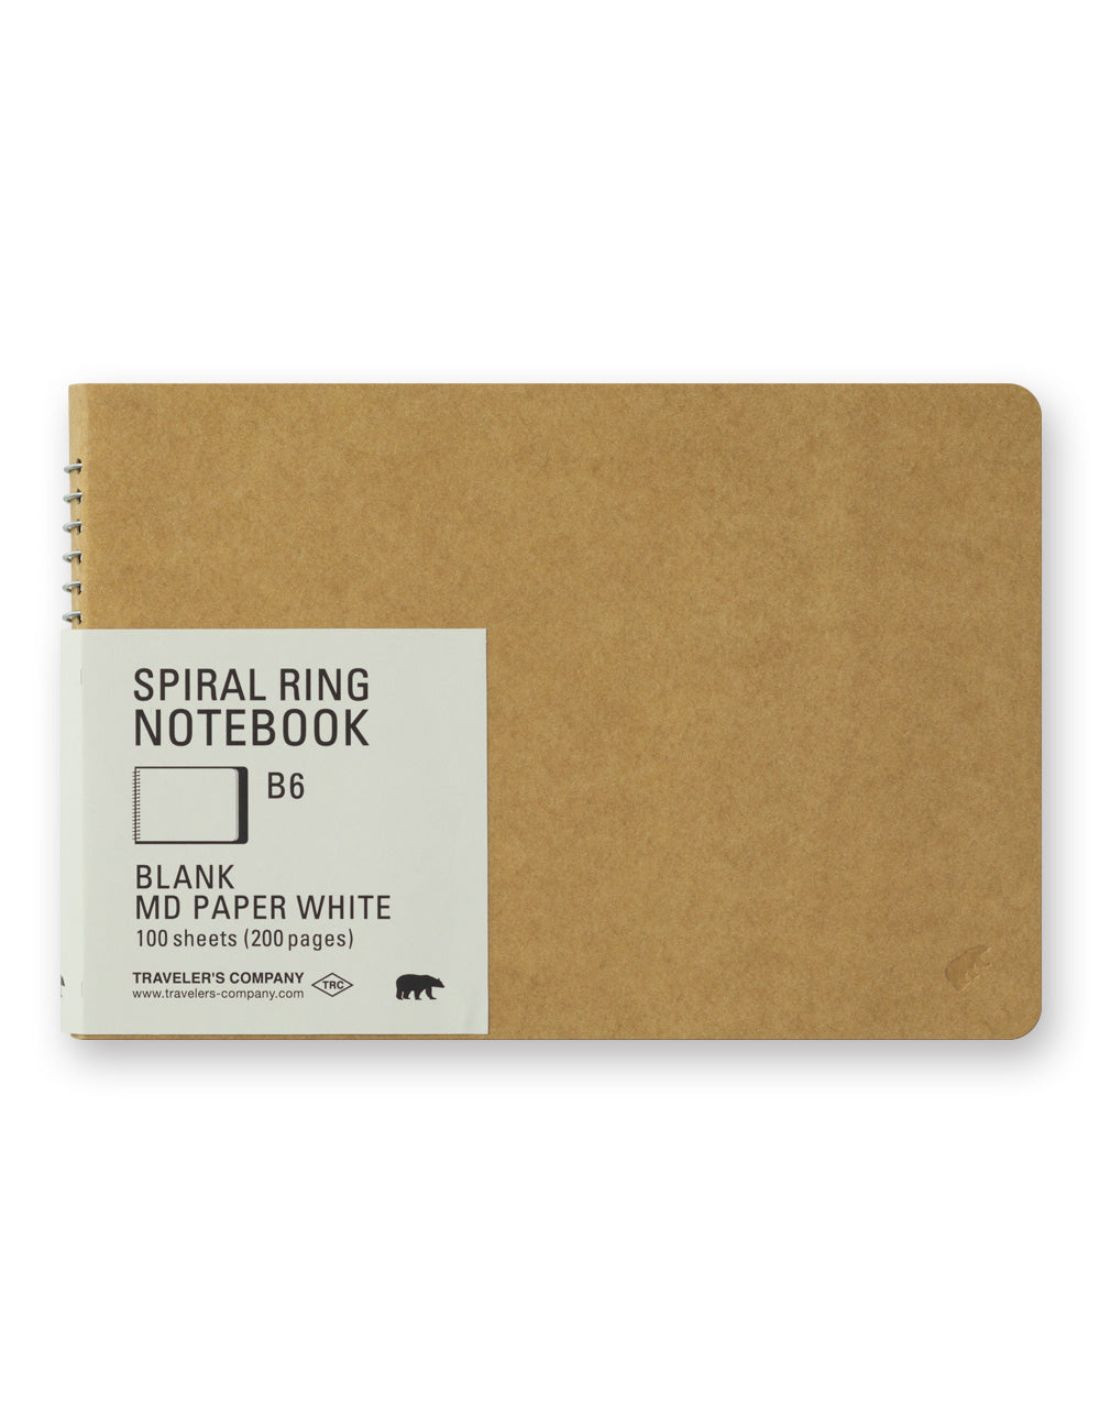 B6 Blank MD Paper White - Spiral Ring Notebook - Traveler's Company